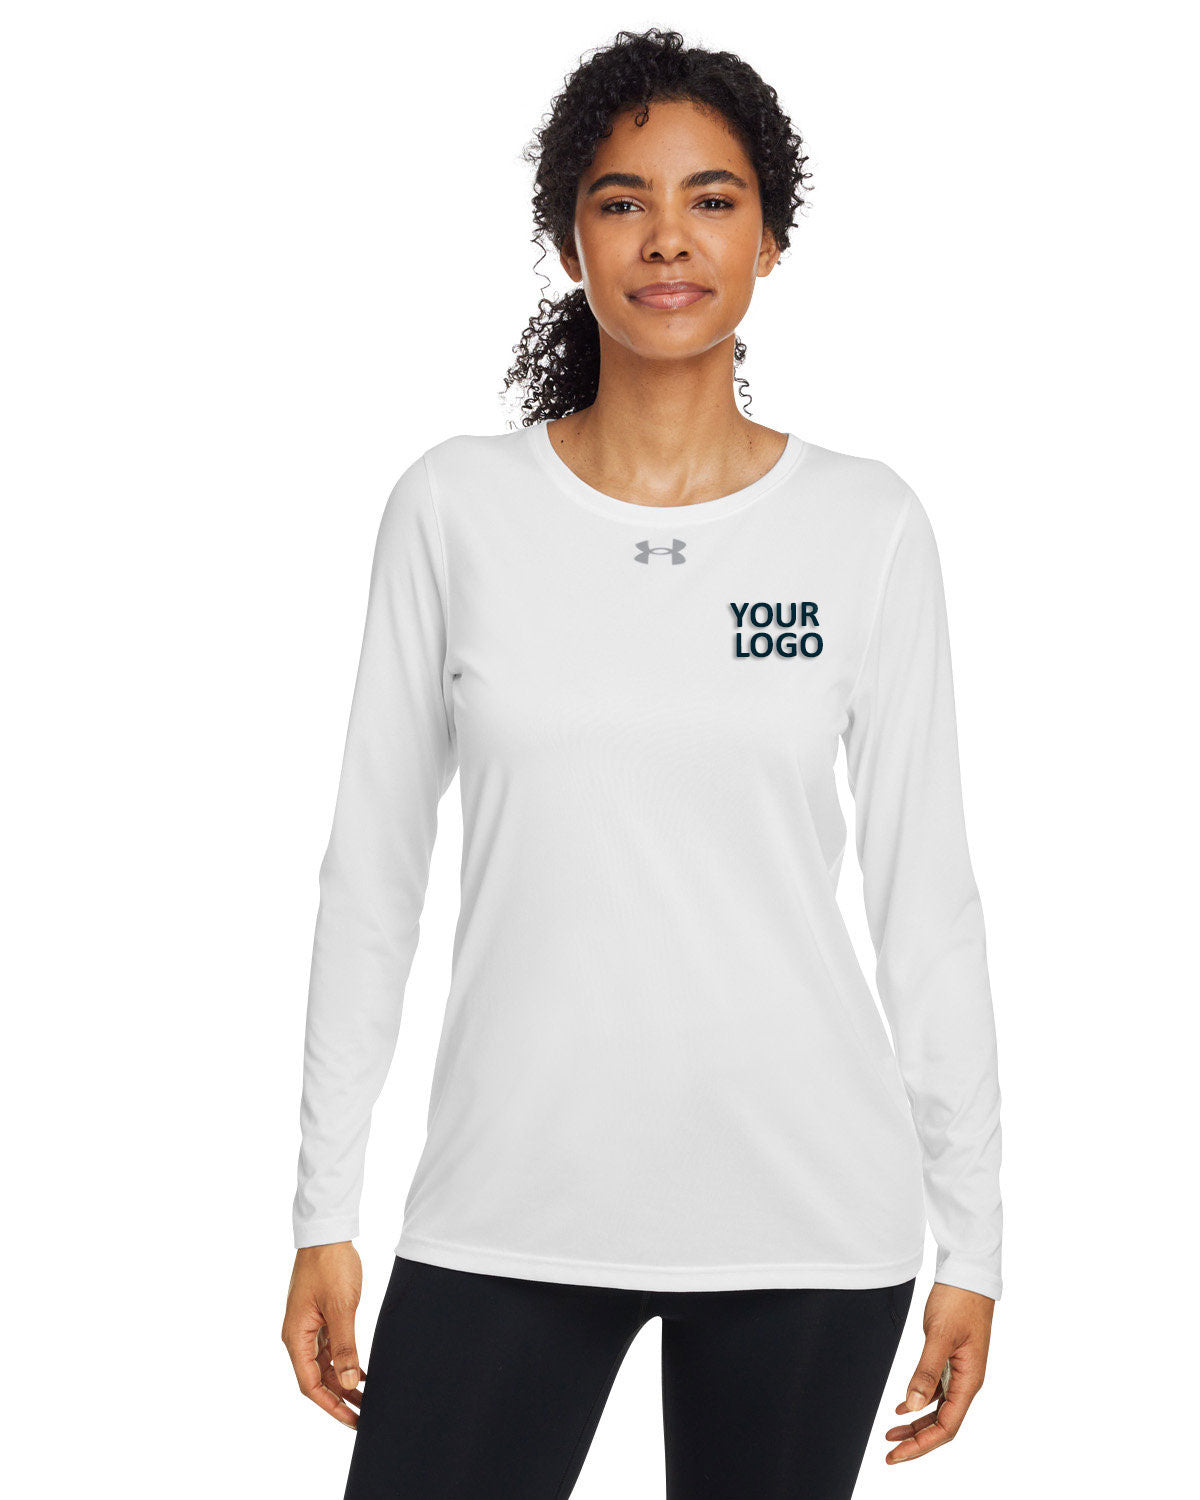 Under Armour Ladies Tech Long-Sleeve T-Shirt, White